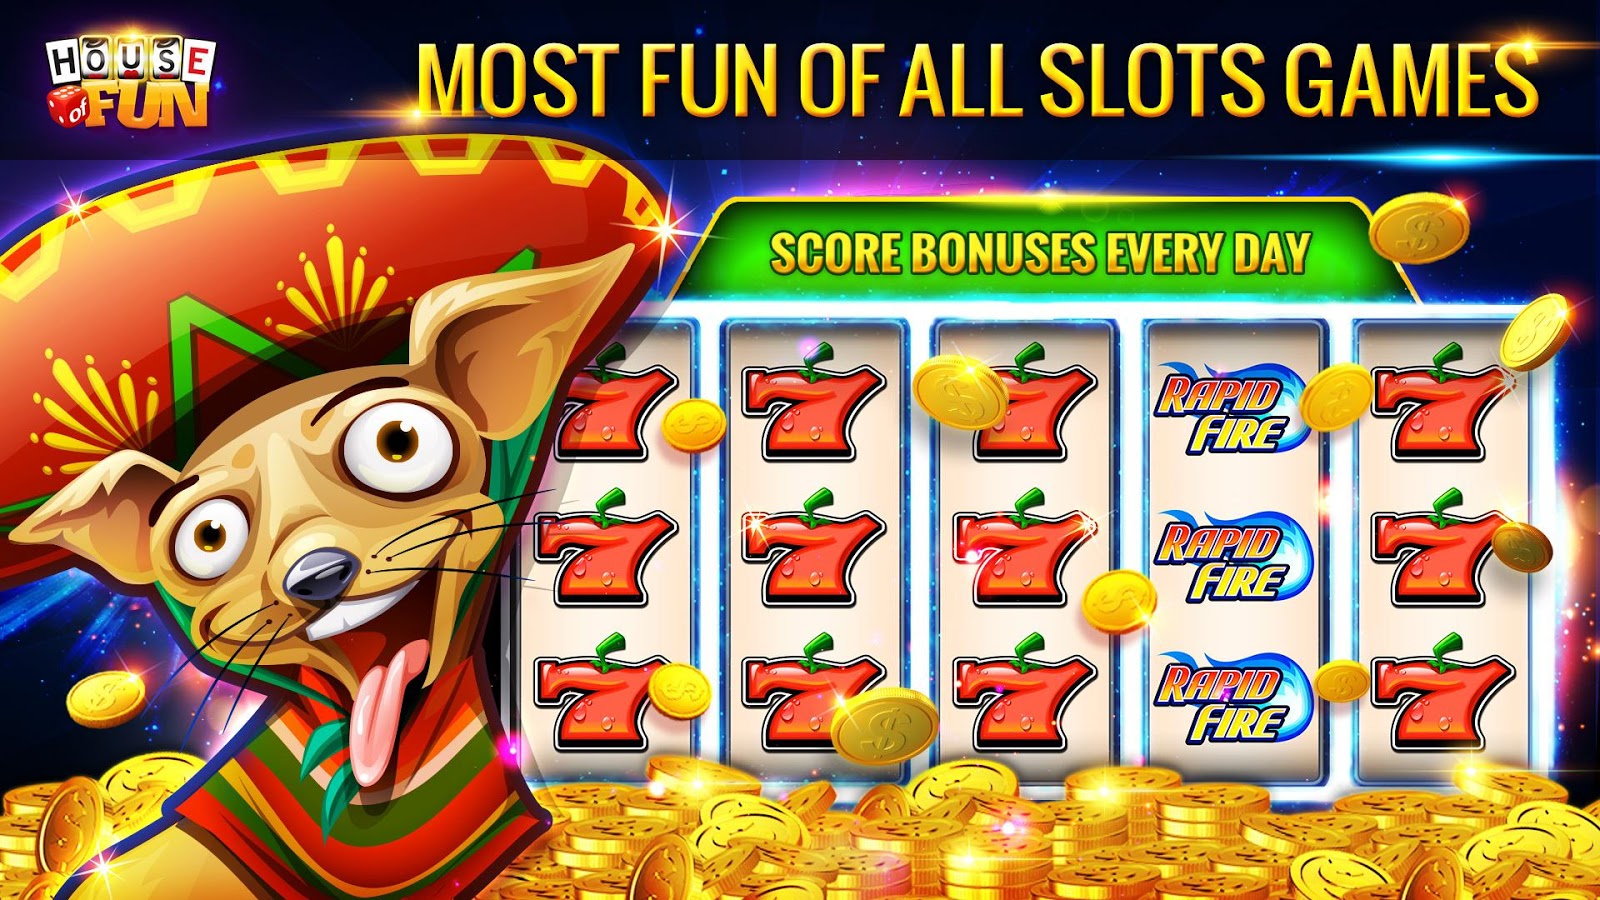 Casino Slots Games To Play Free Online